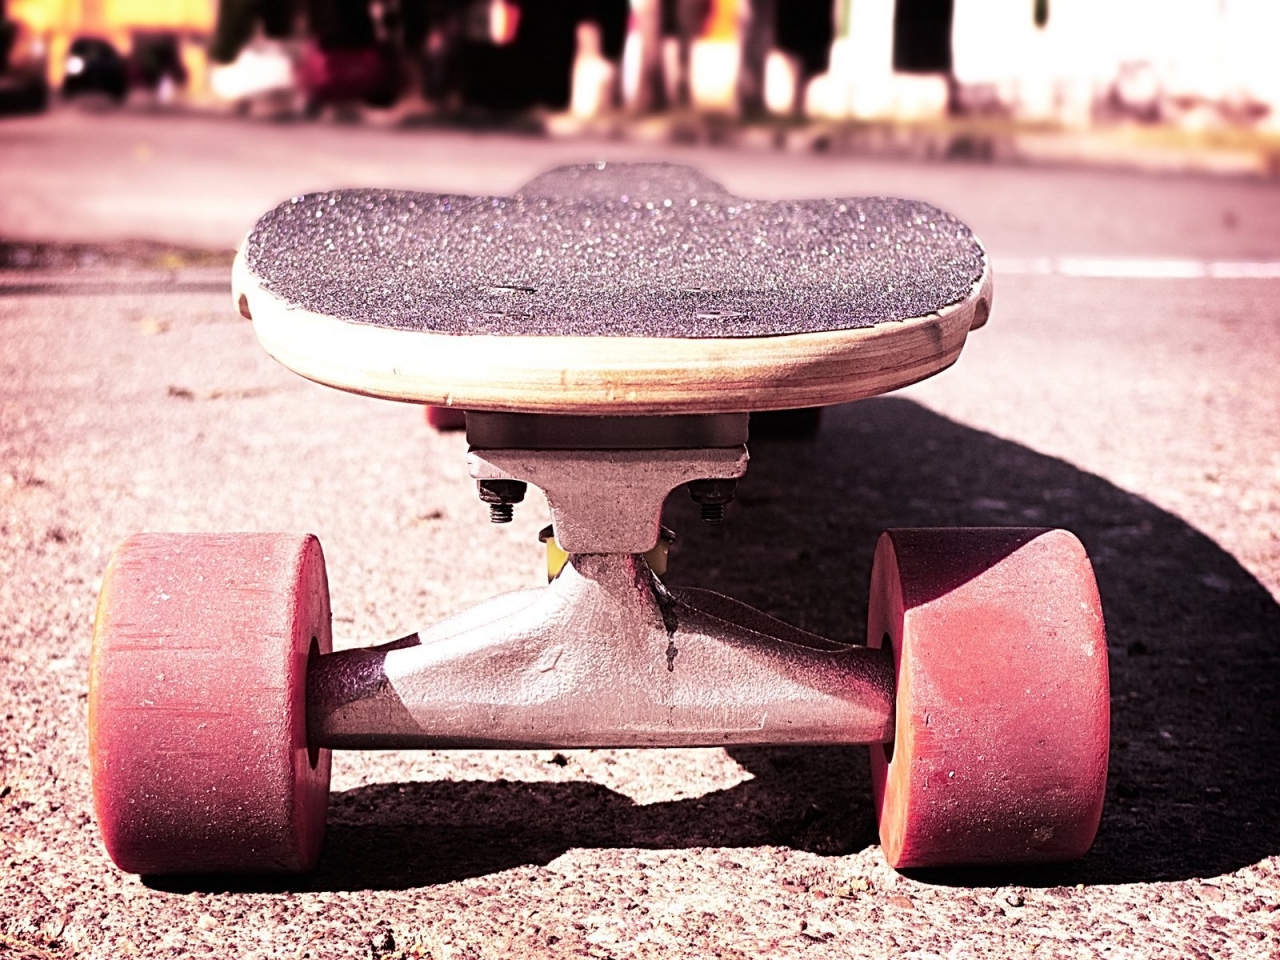 Cool skateboard for 1280 x 960 resolution